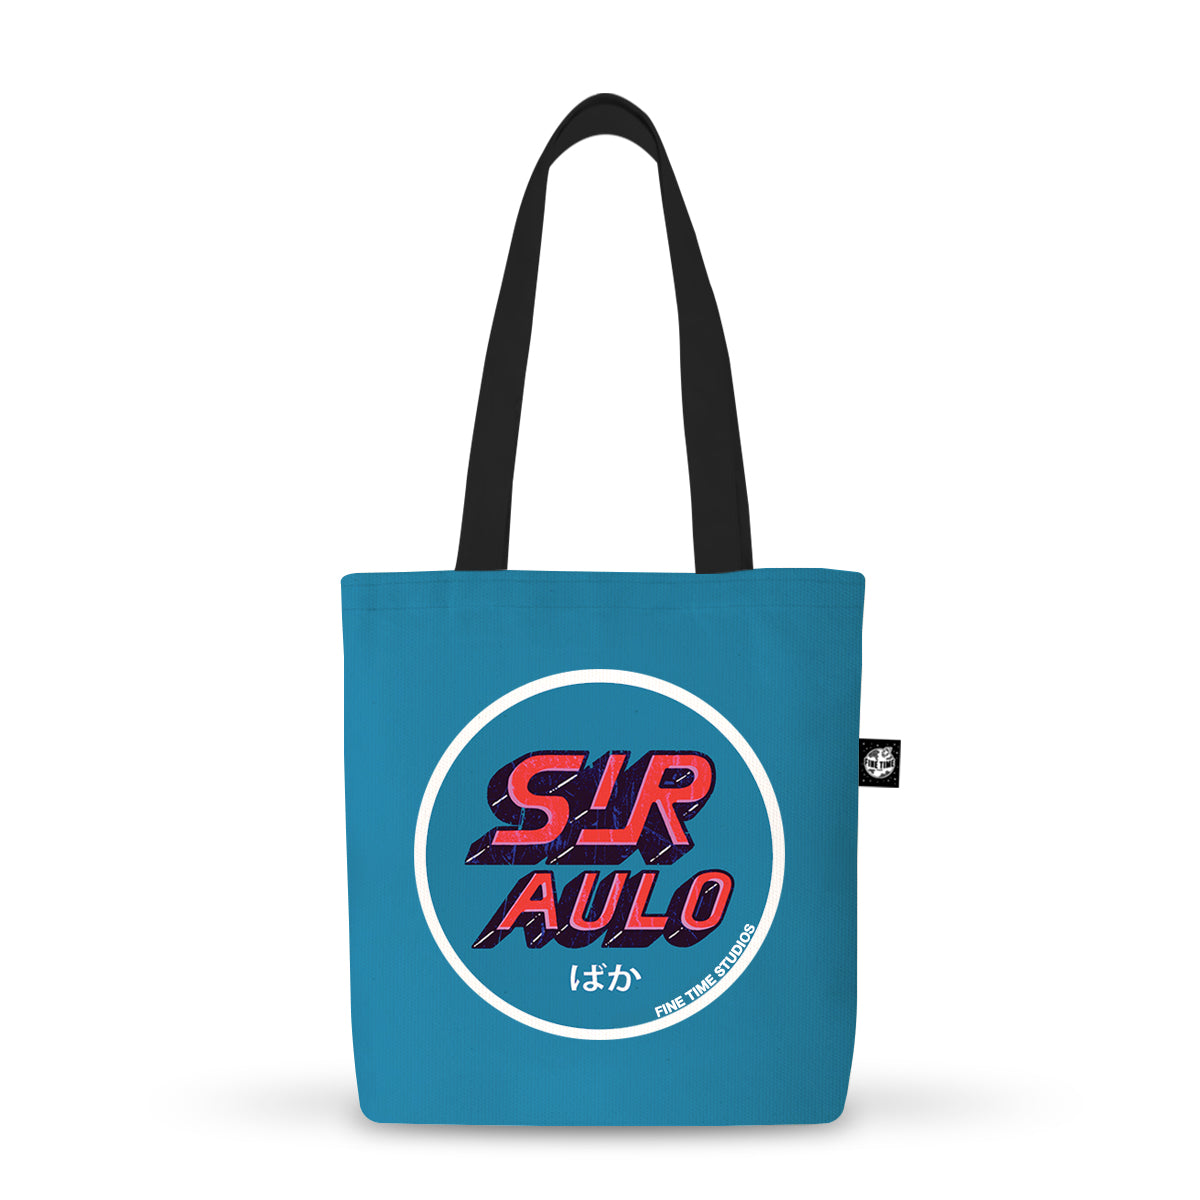 Sir Aulo Round Tote Bag